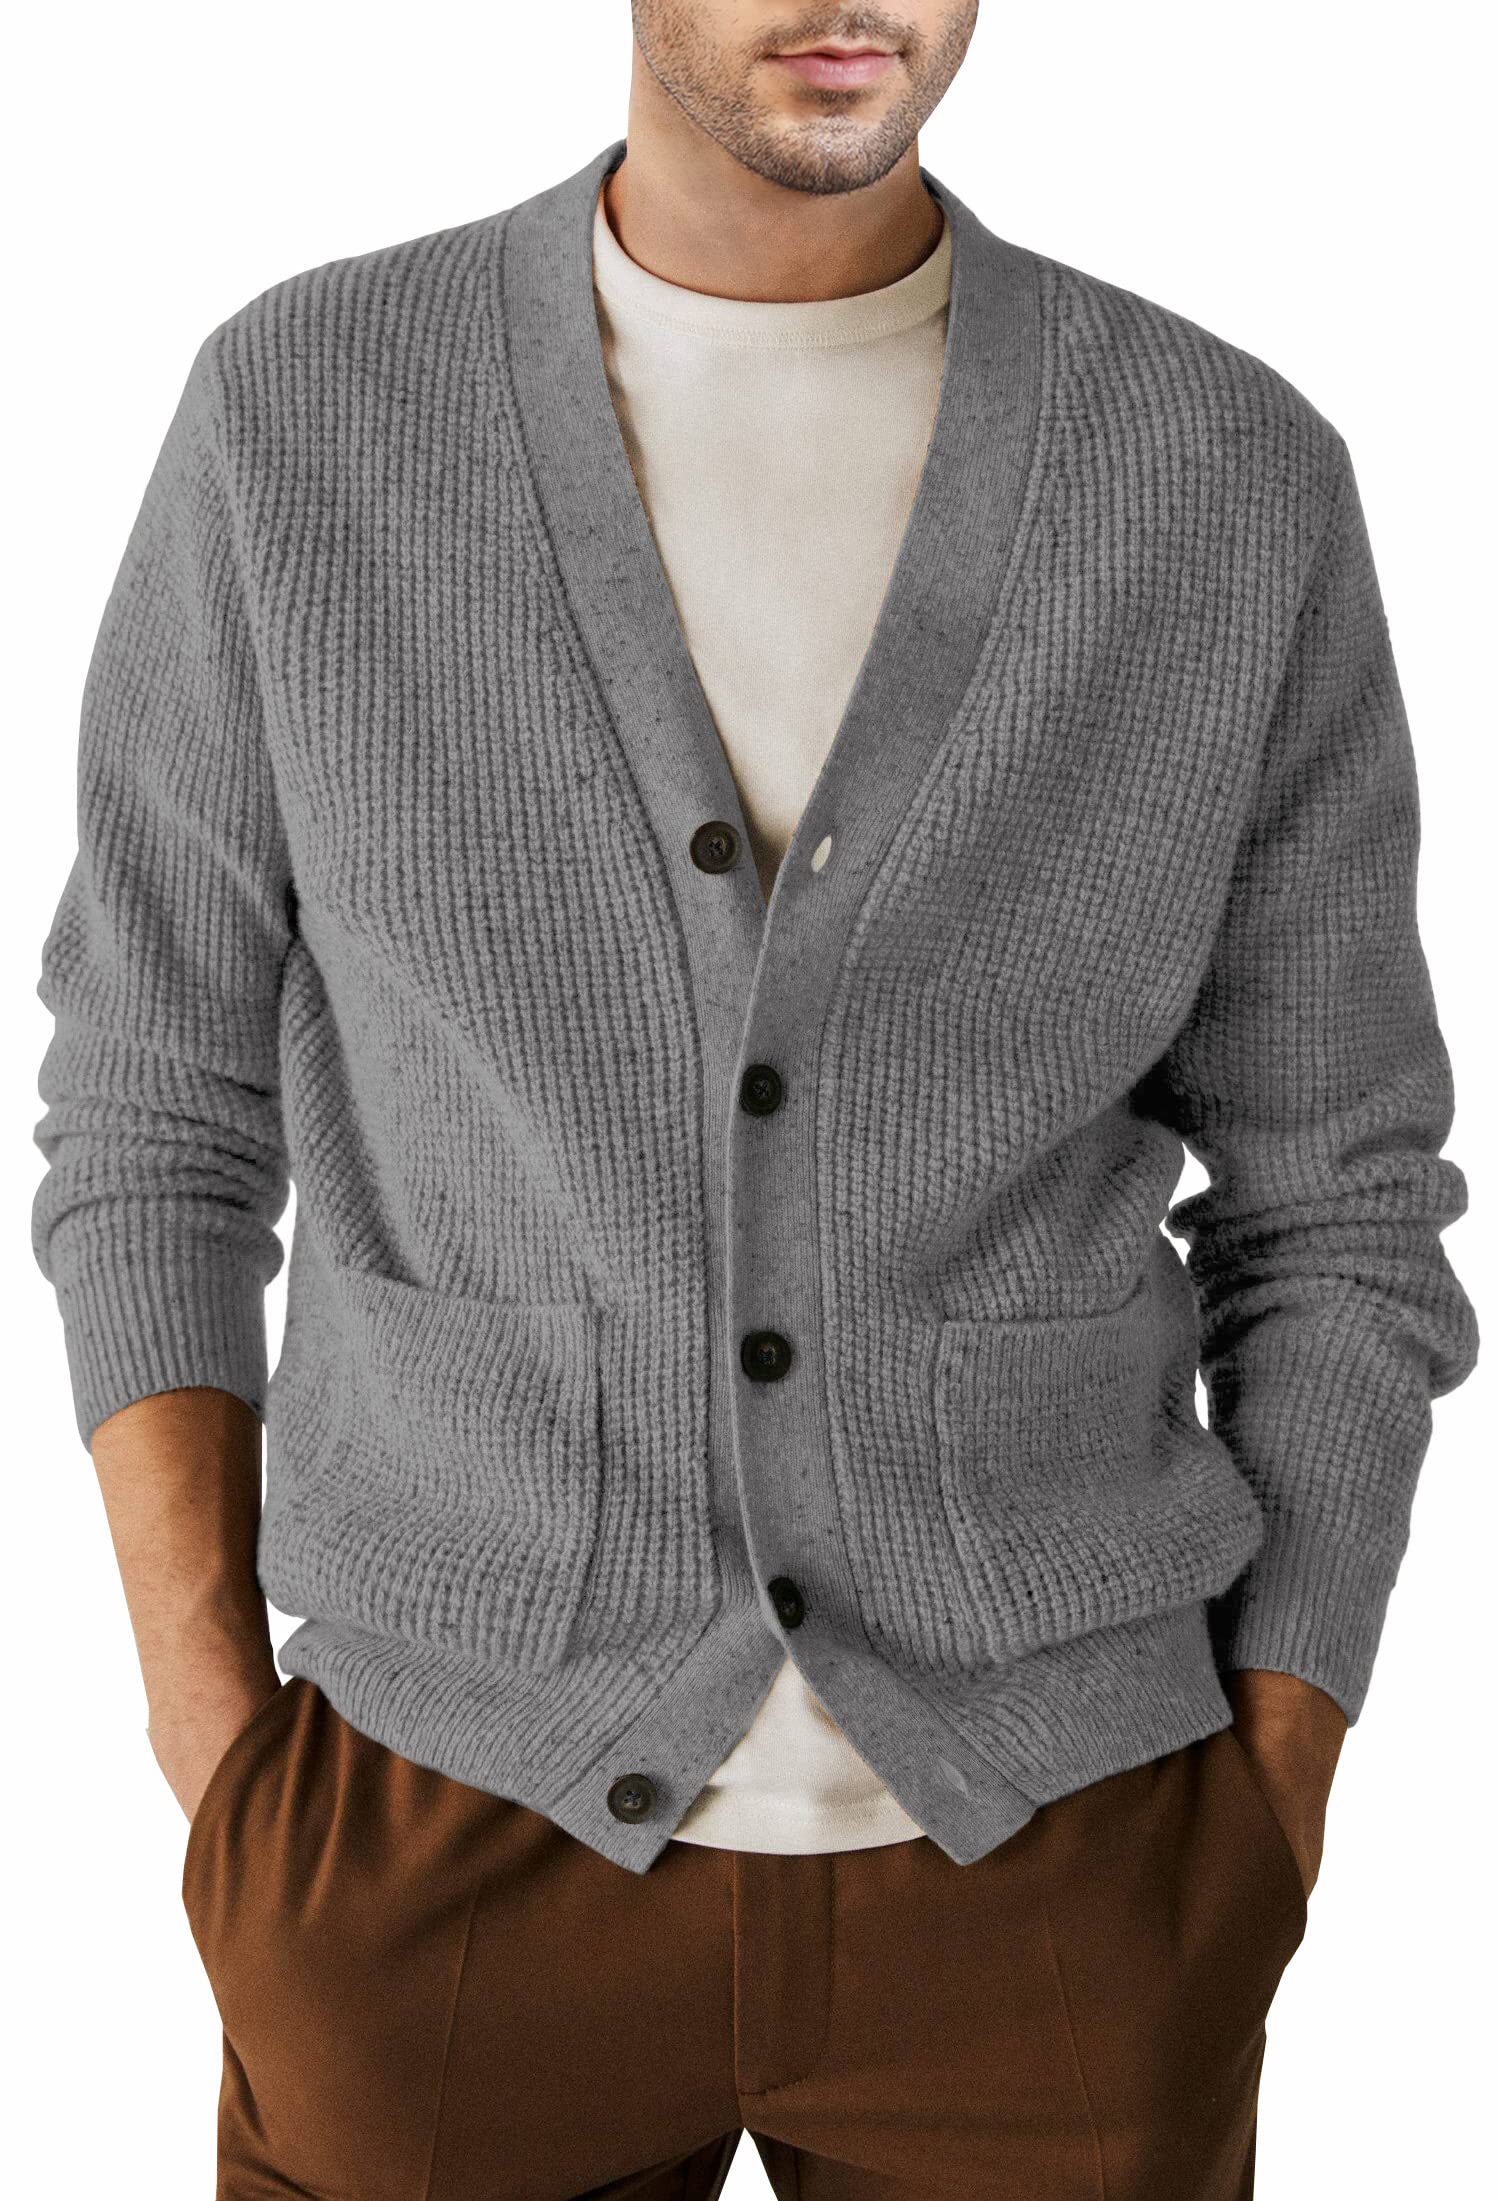 Lightweight cardigan sweaters – perfect for fall插图4